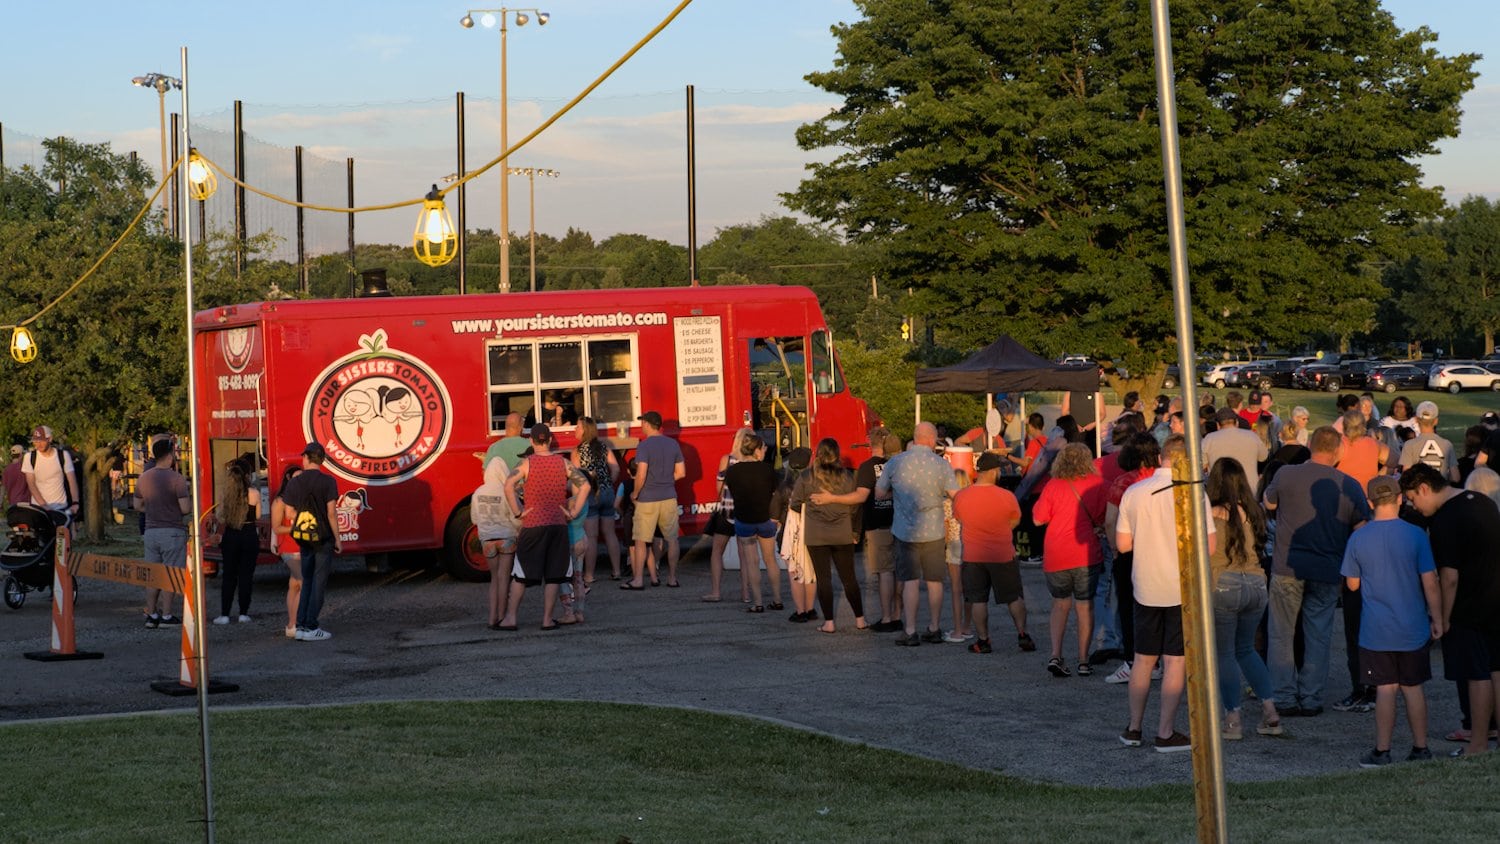 People lining up for wood-fired pizzas from Your Sister's Tomato food truck.